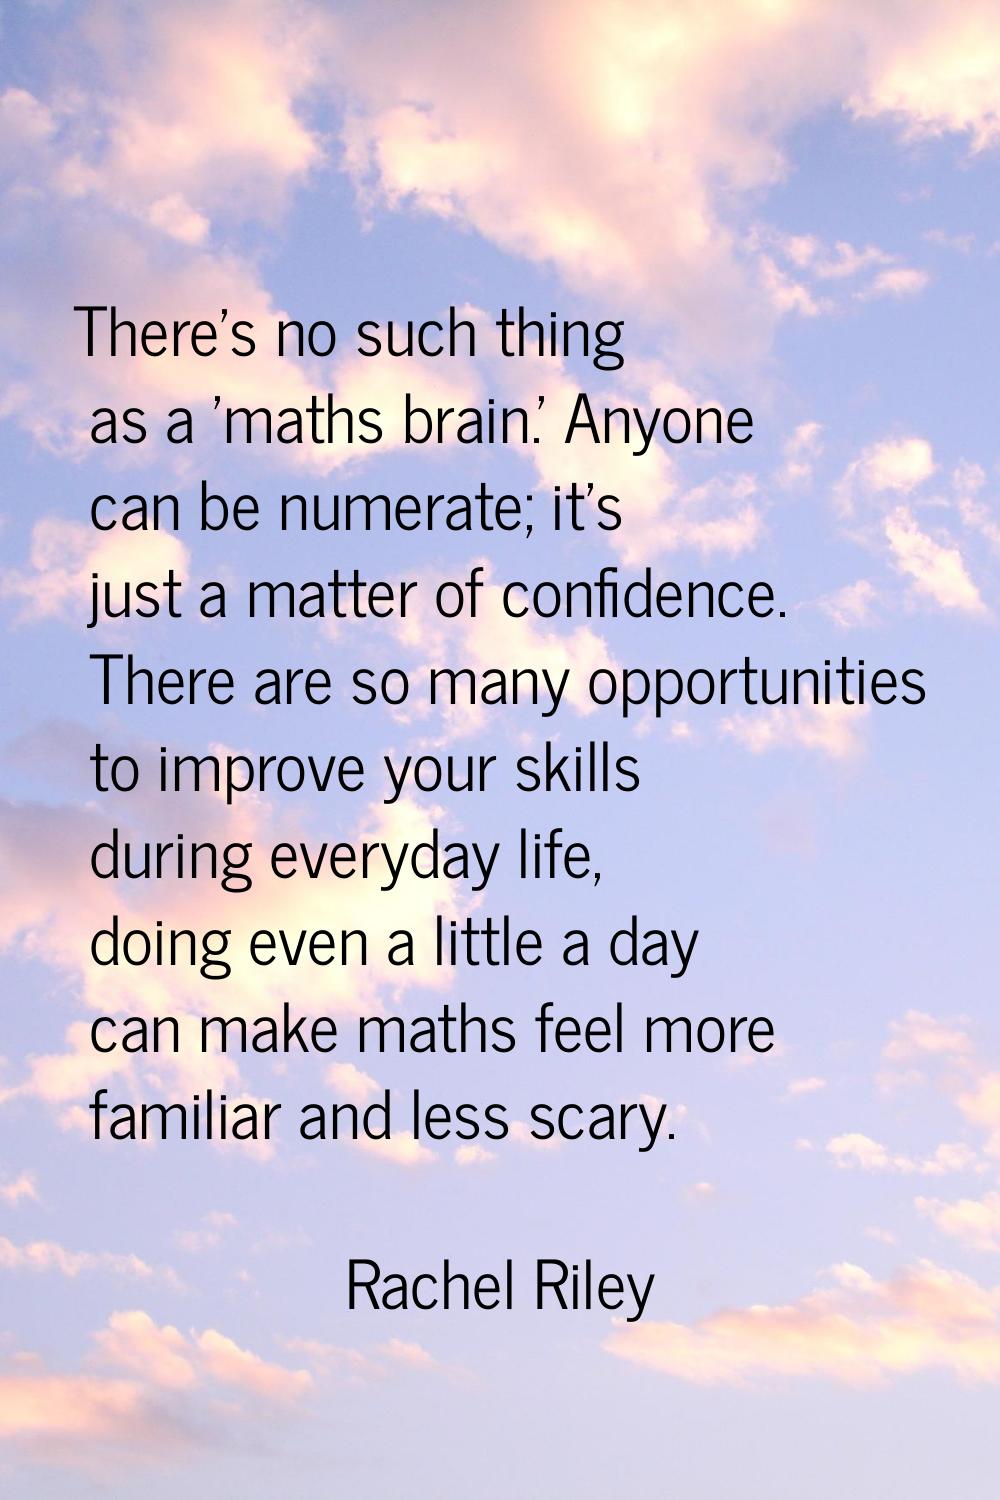 There's no such thing as a 'maths brain.' Anyone can be numerate; it's just a matter of confidence.